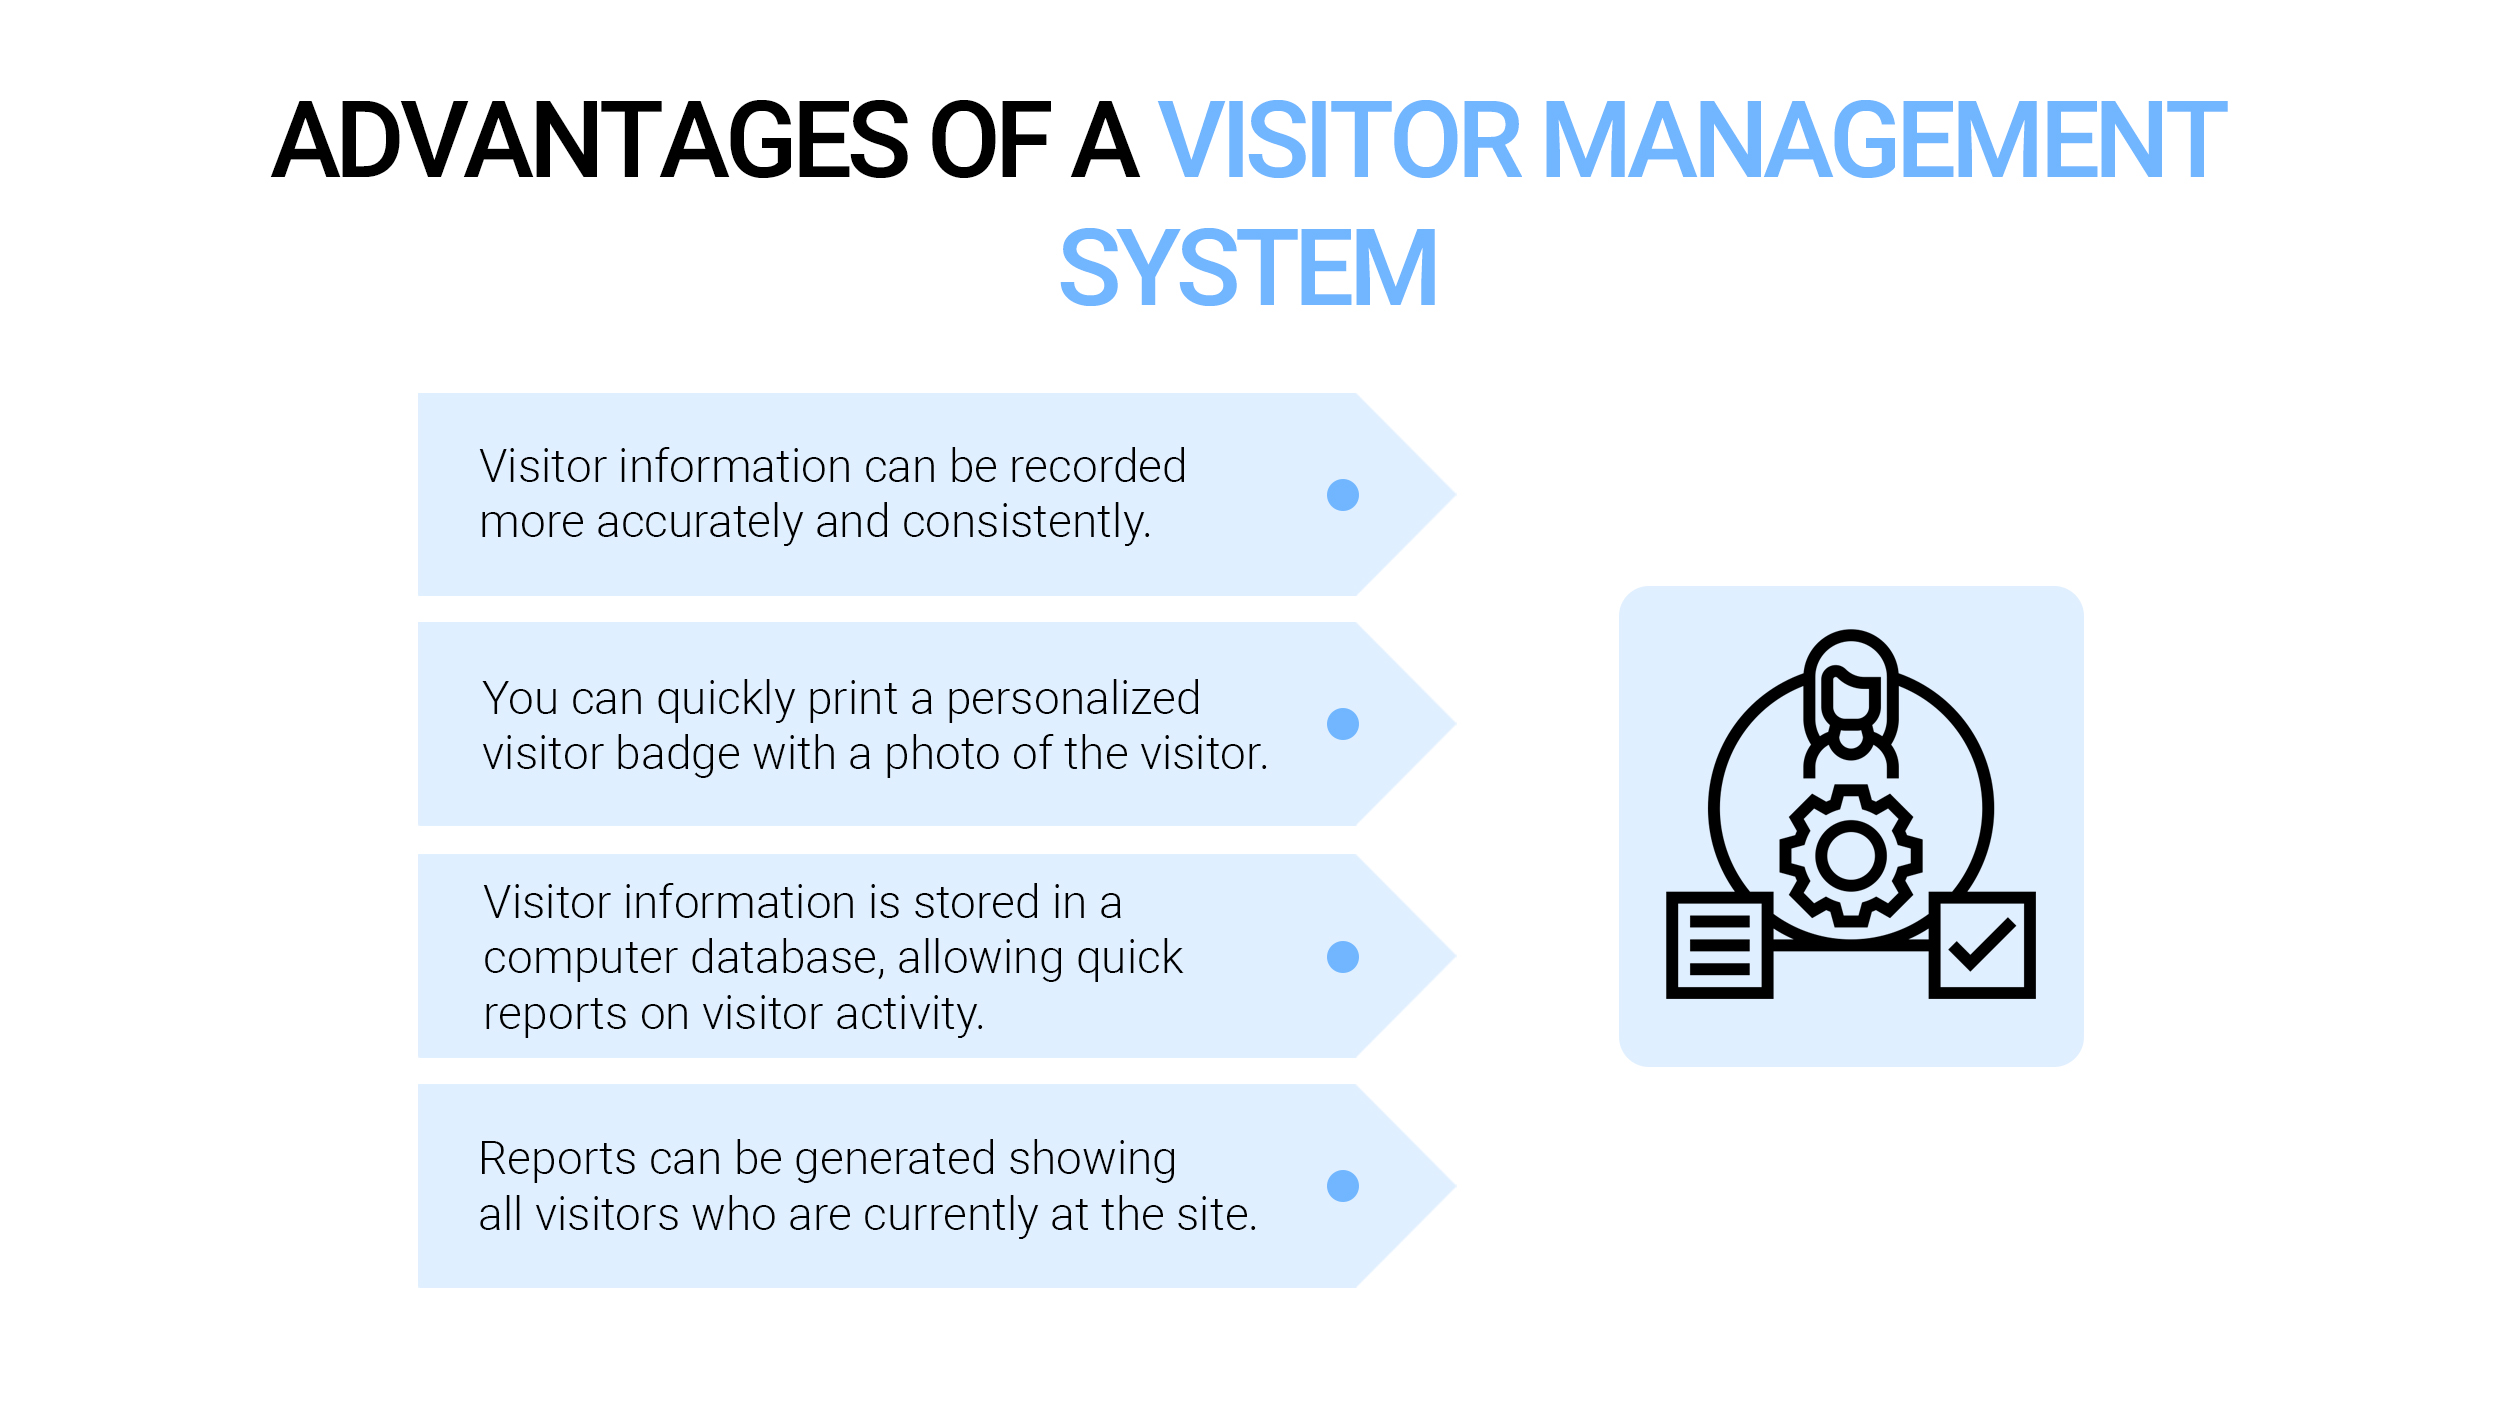 Advantages of a visitor management system